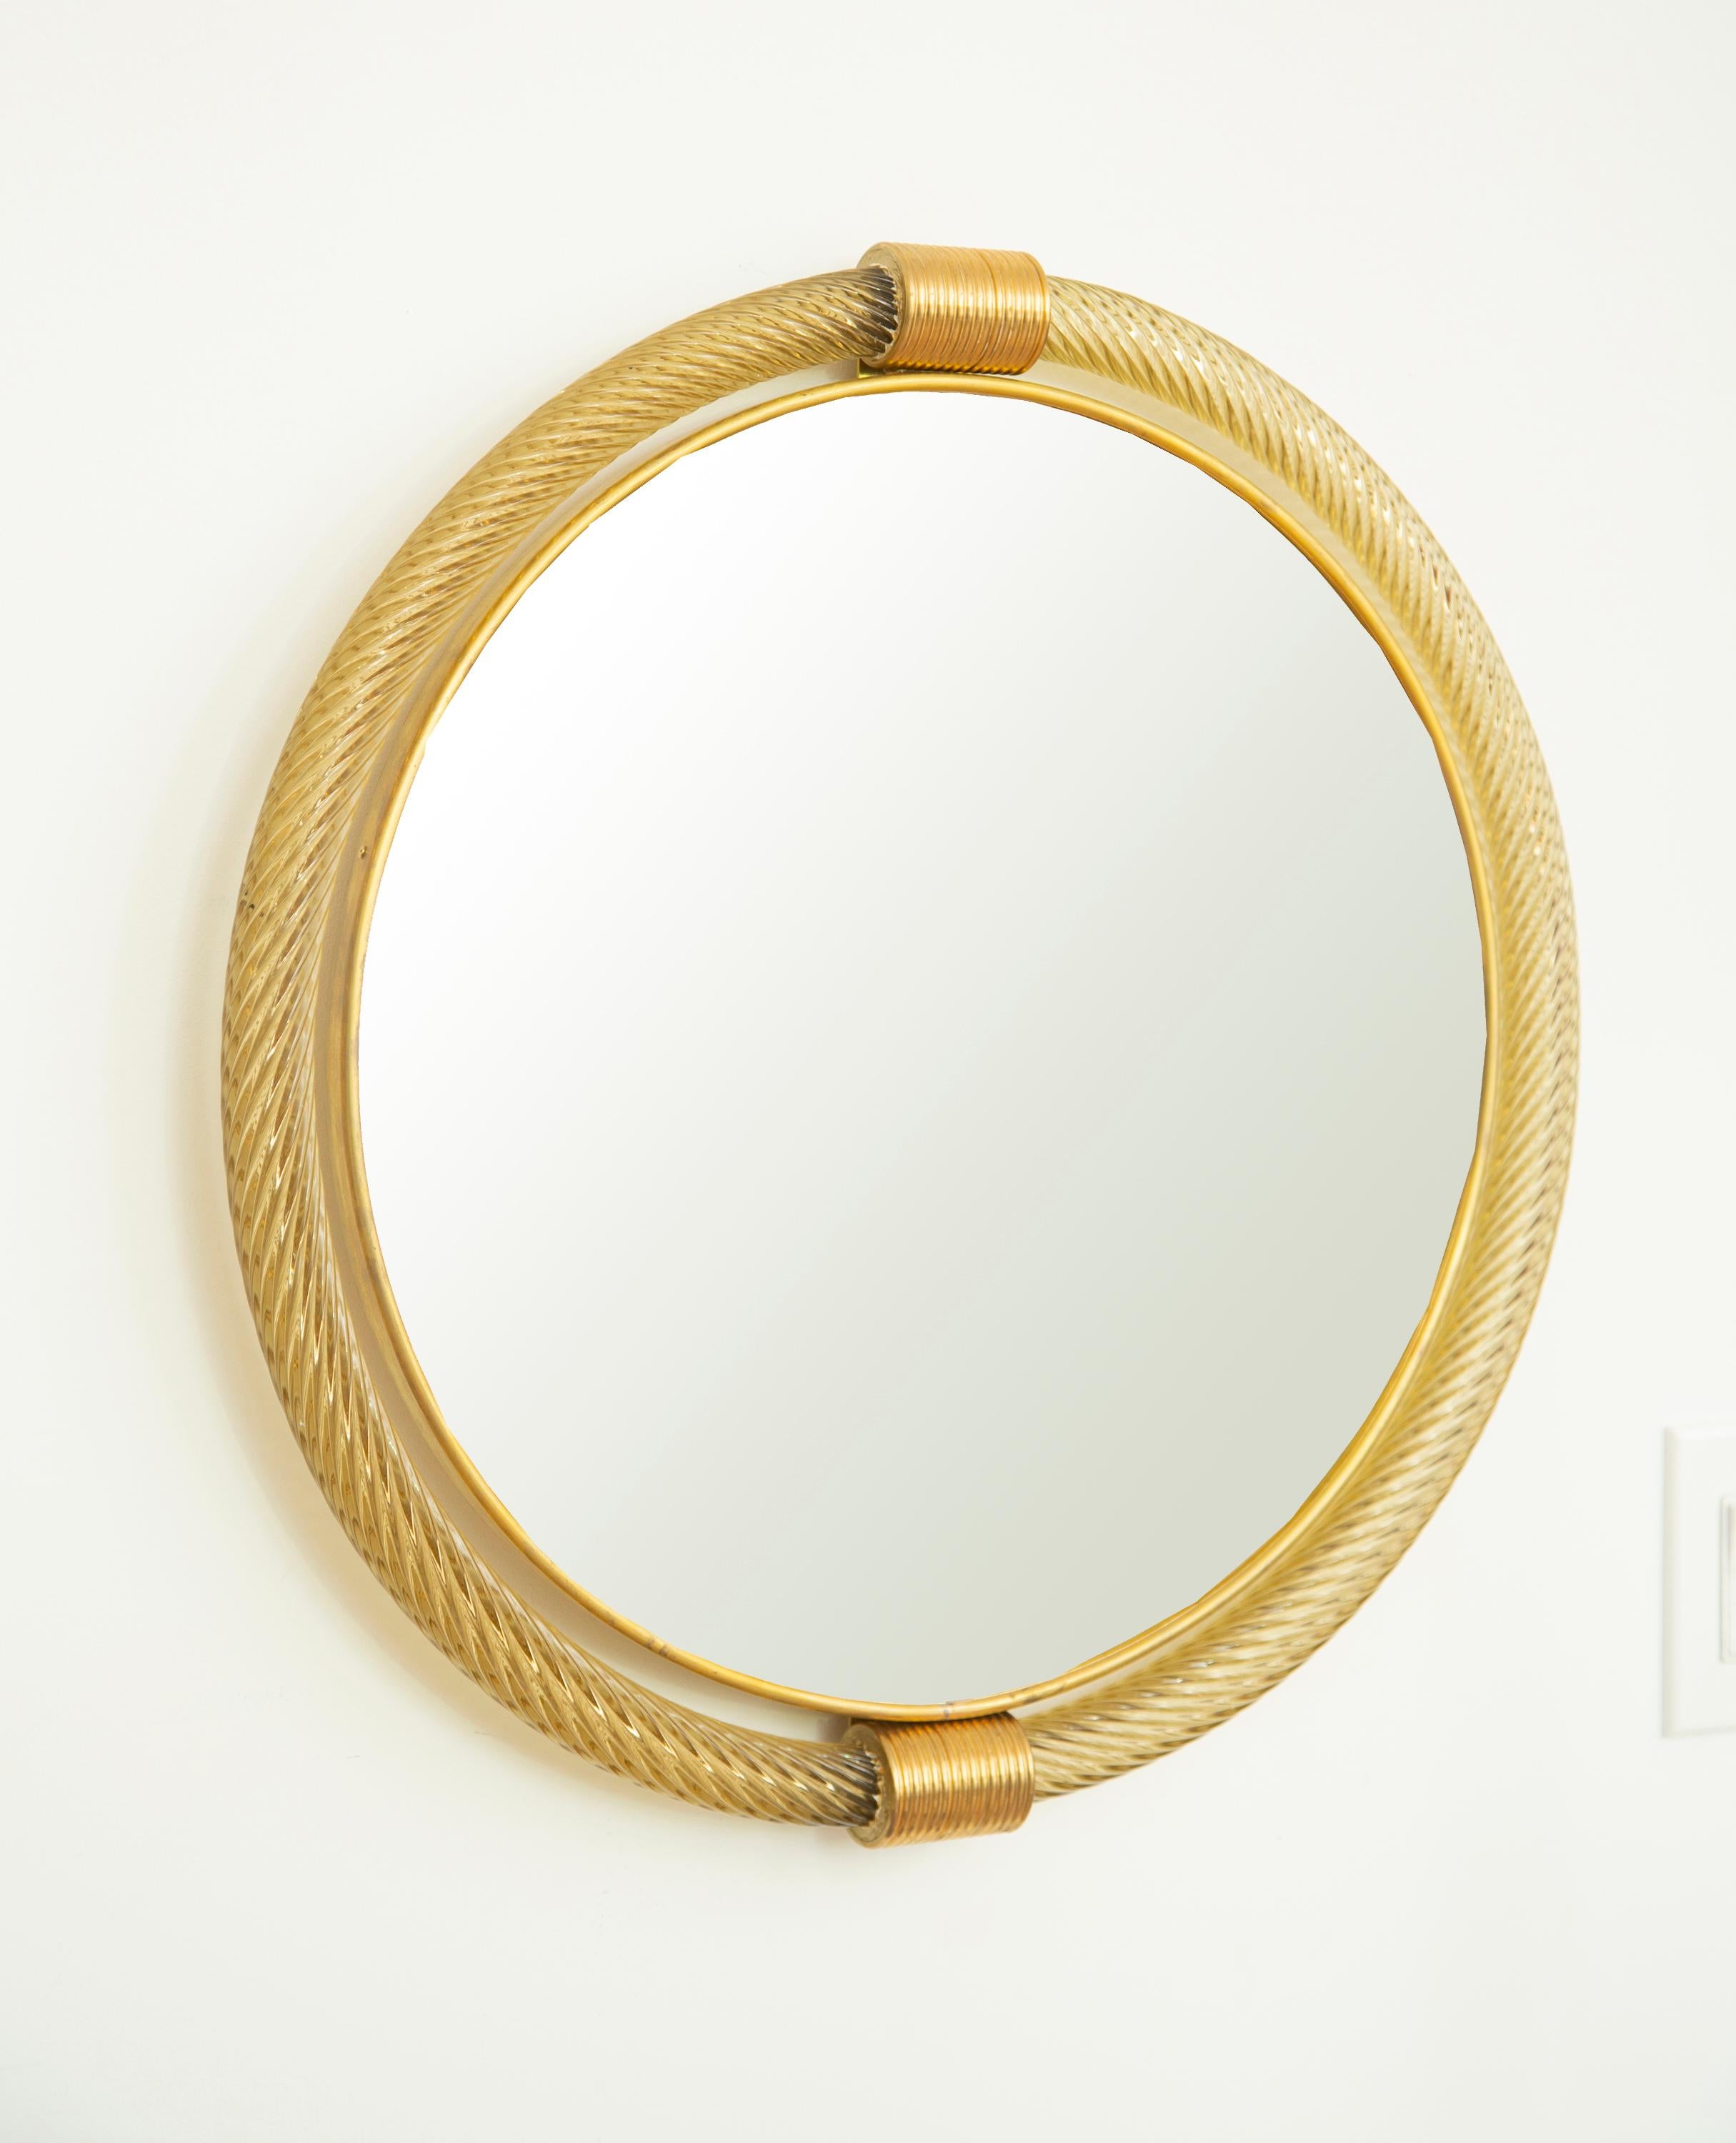 Round gilded twisted rope hand blown Murano glass mirror, in stock
Gilded Murano hand blown glass.
Brass fittings and a thin inner brass gallery.
Located in our store in Miami ready for shipping.